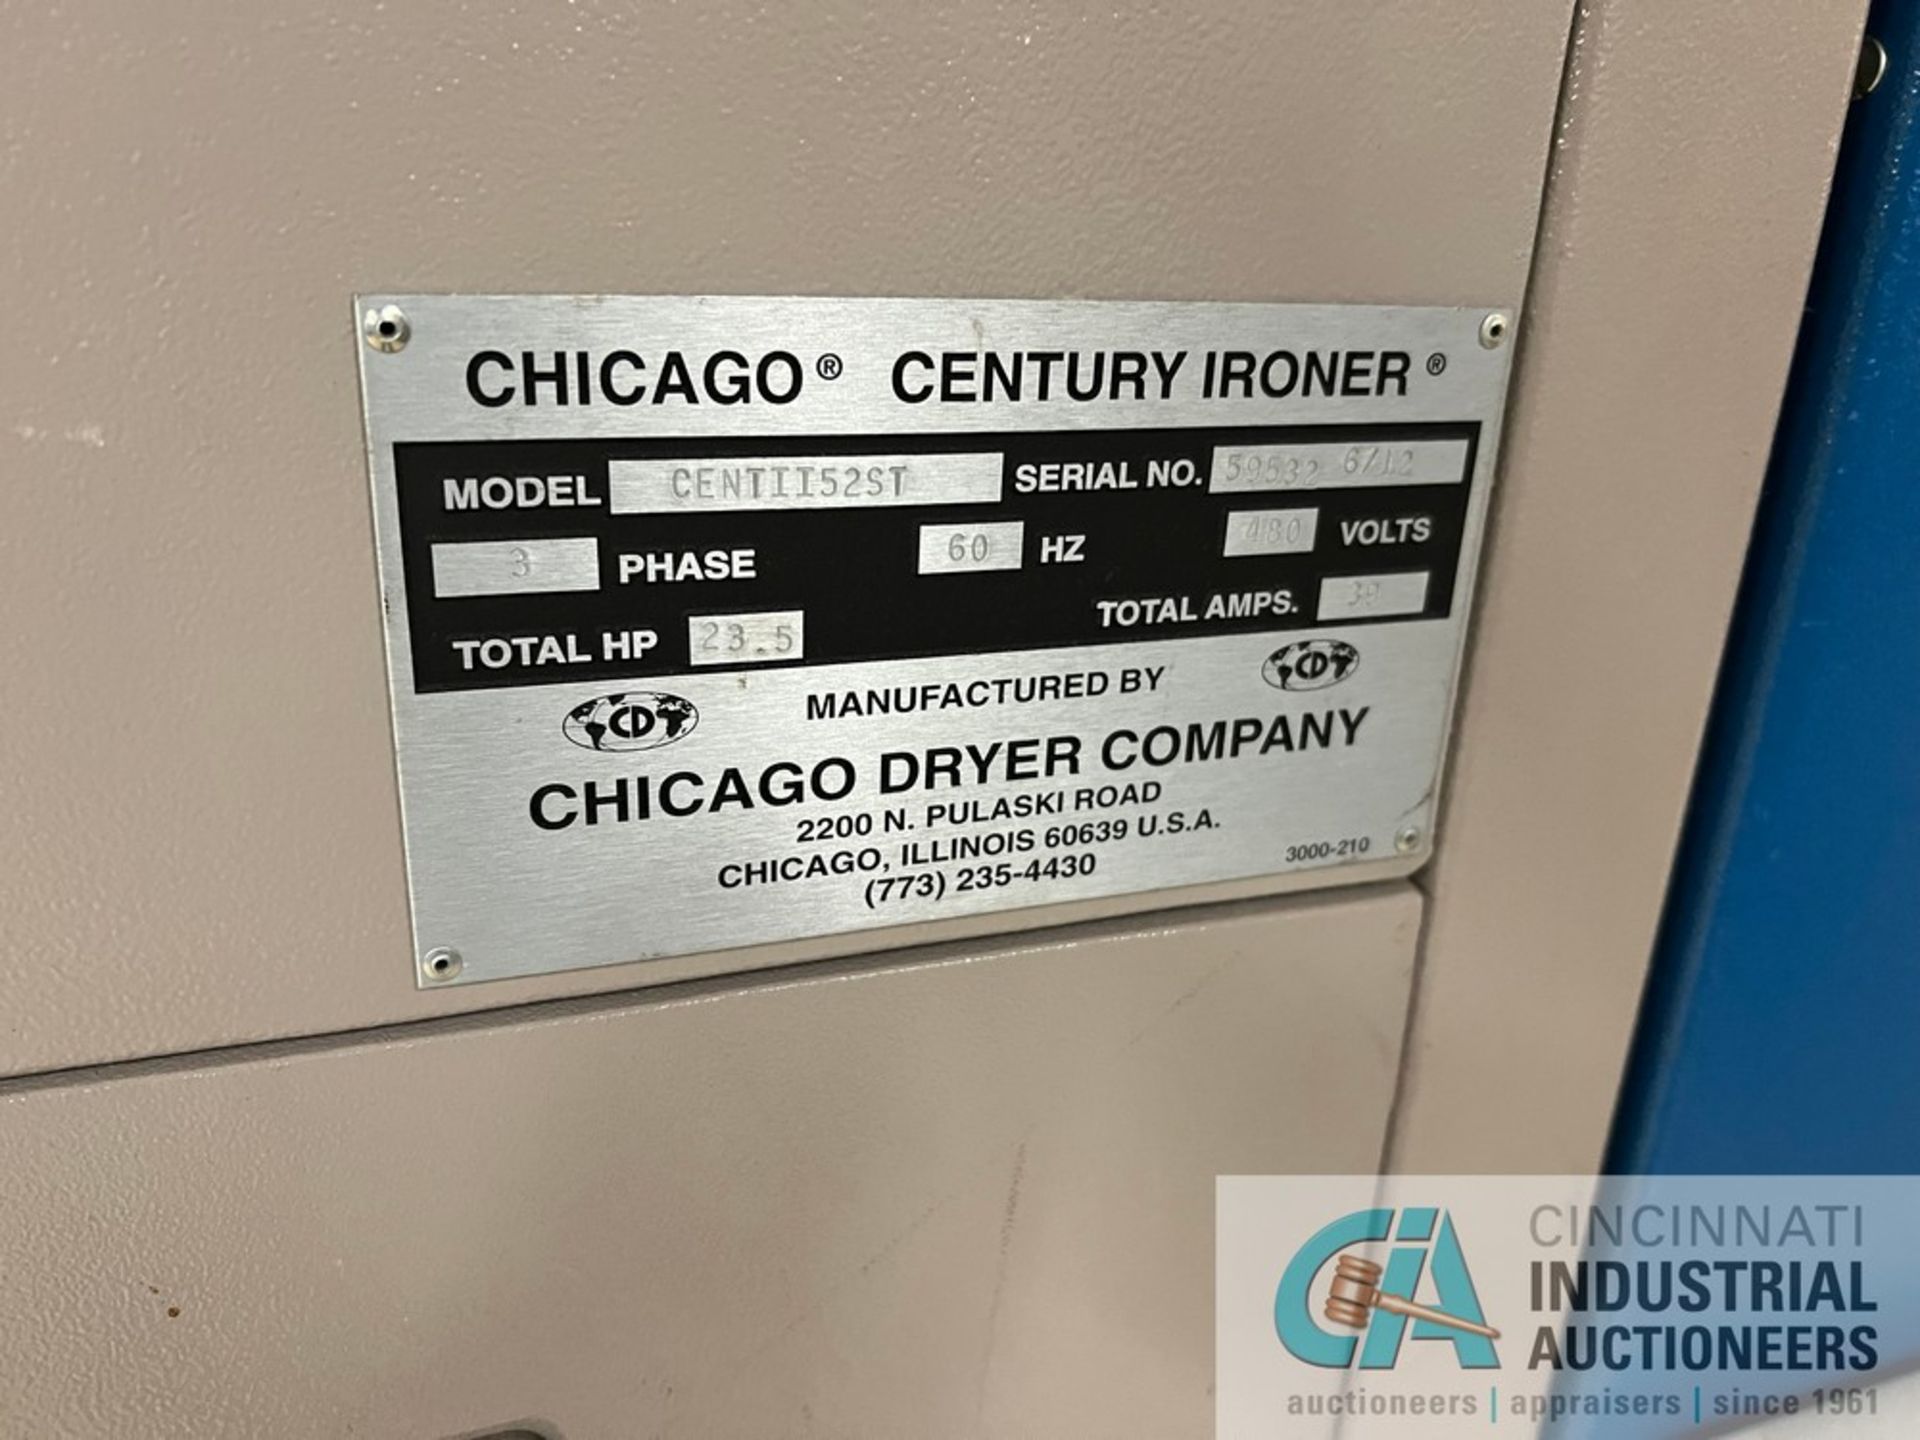 120" CHICAGO MODEL CENTII52ST TWO-ROLL STEAM HEATED FLATWORK IRONER; S/N 59532, (2) 52" DIAMETER - Image 3 of 6